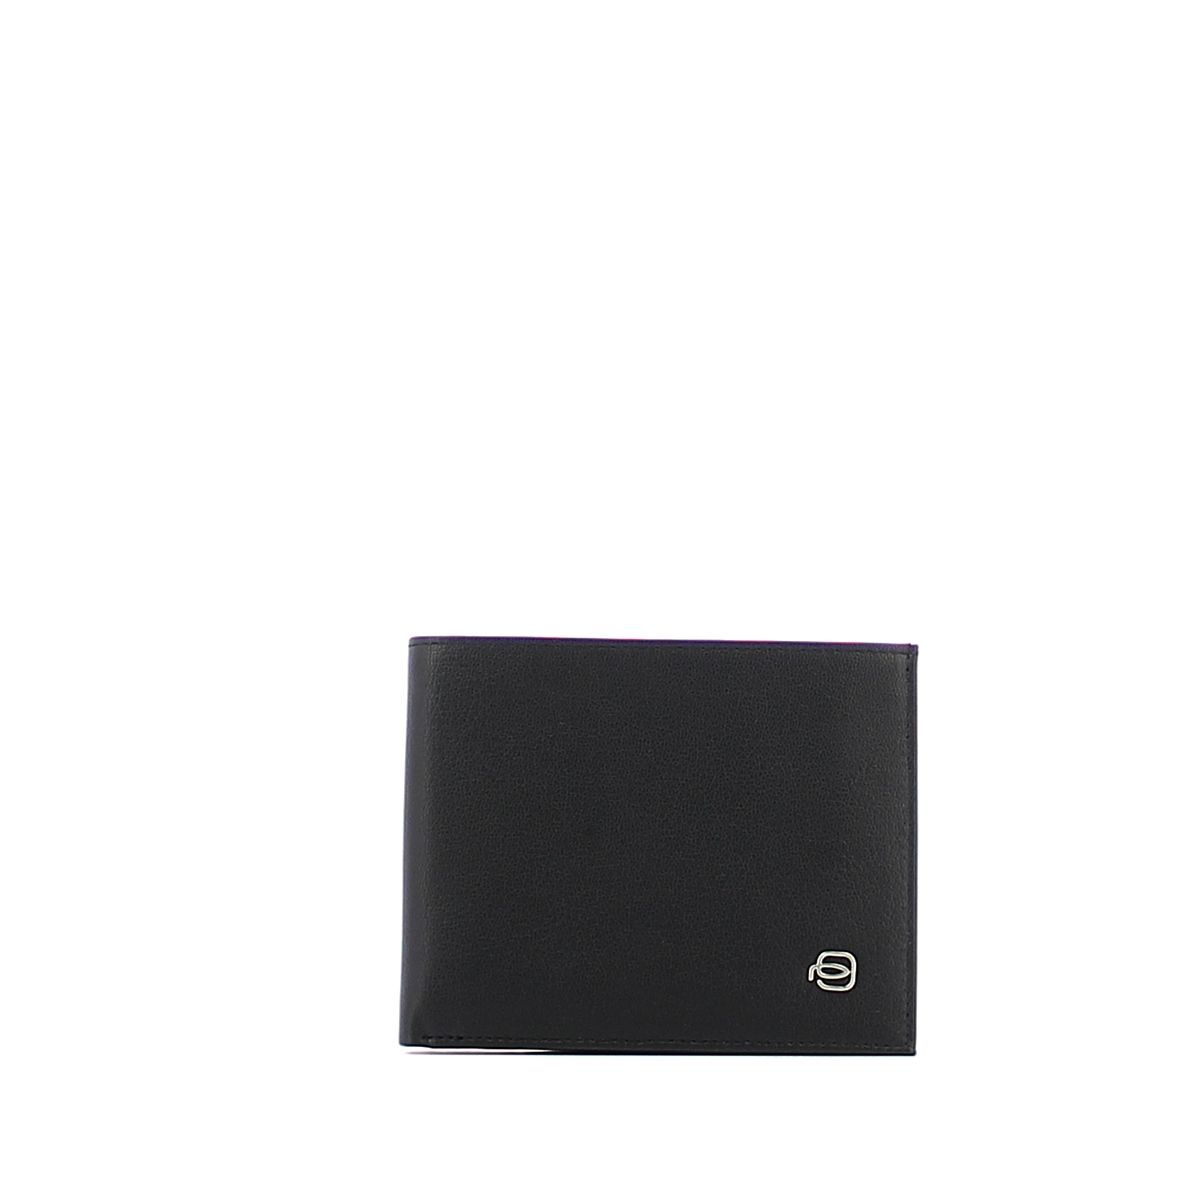 Men Wallet with Credit Card Holder Piquadro, casual and essential accessory in genuine leather.